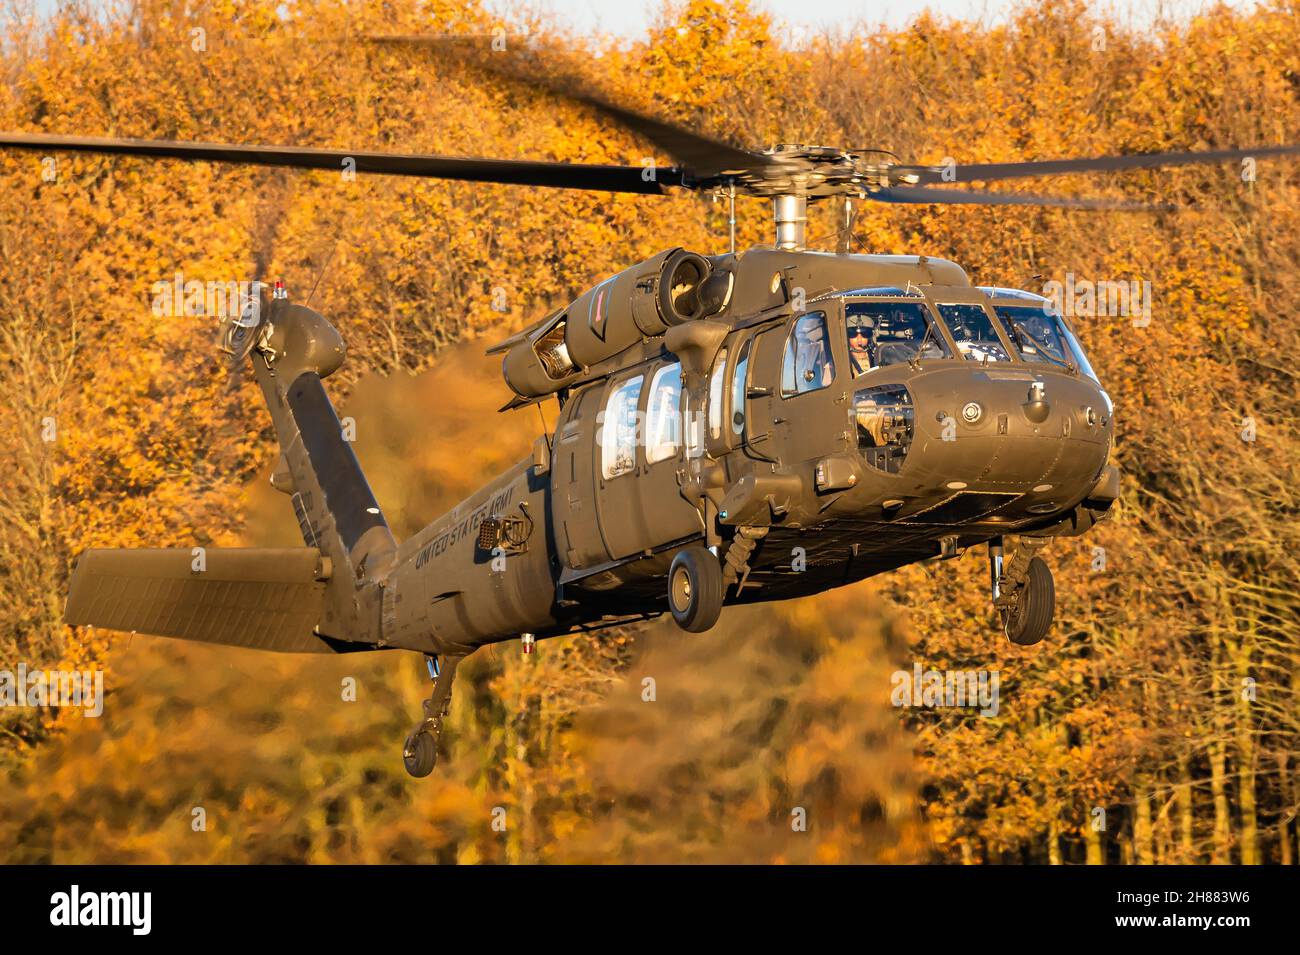 A Sikorsky UH-60 Black Hawk twin-engine utility helicopter of the US Army at the Gilze-Rijen Air Base, The Netherlands. Stock Photo